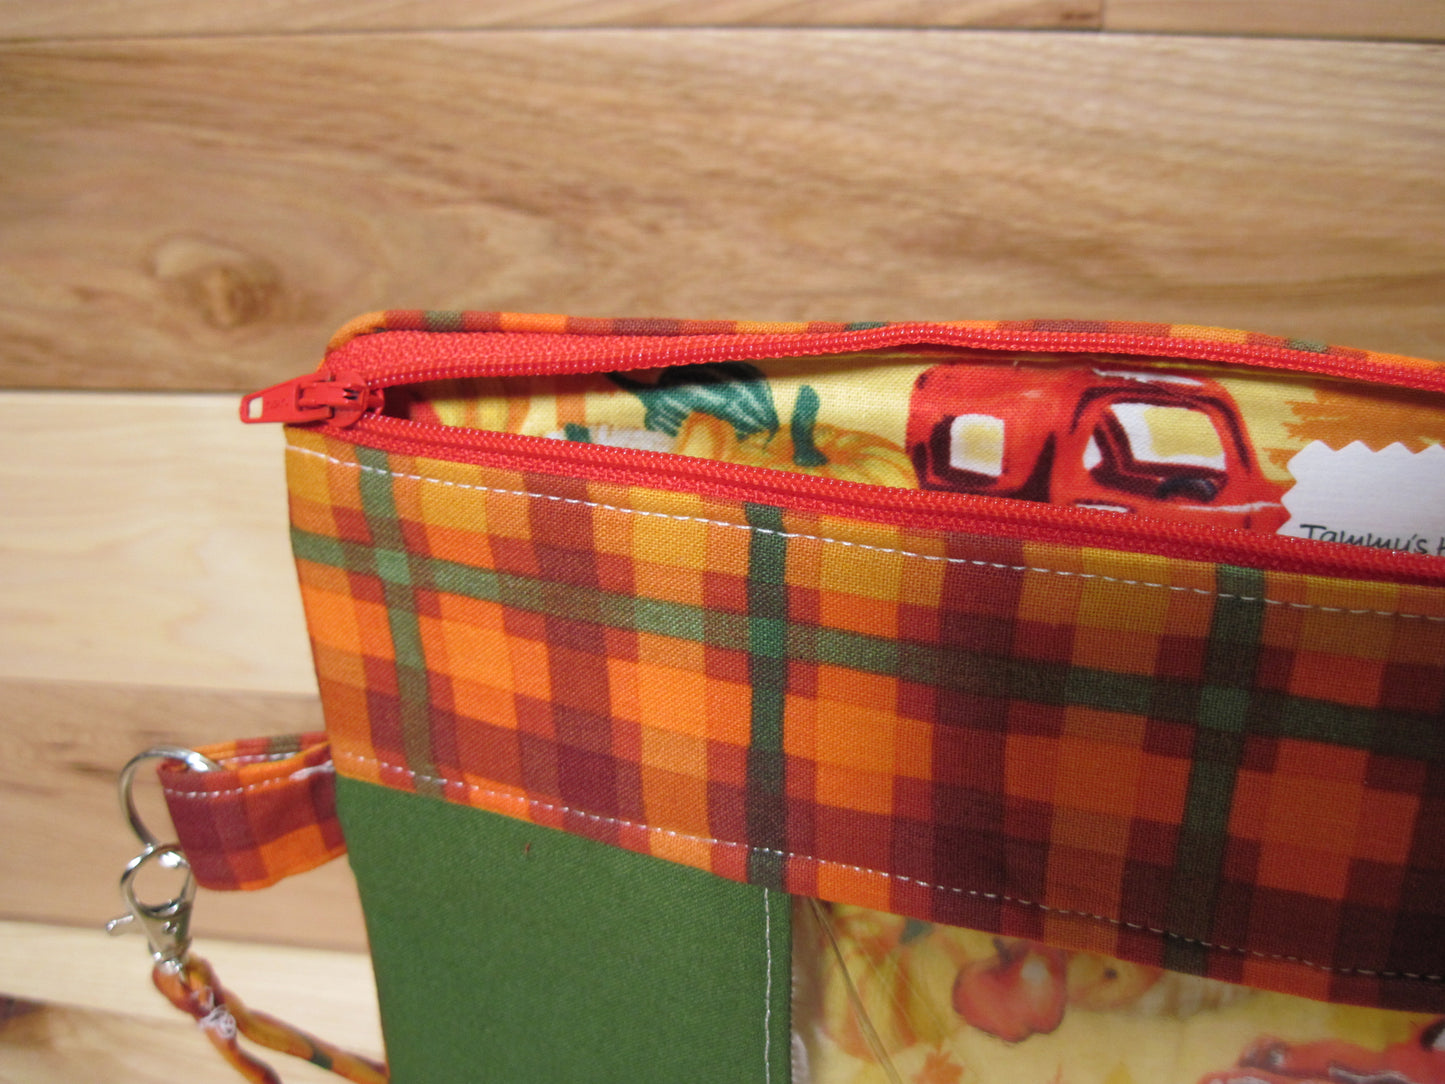 Medium Window Plaid/Green with Red Truck project bag